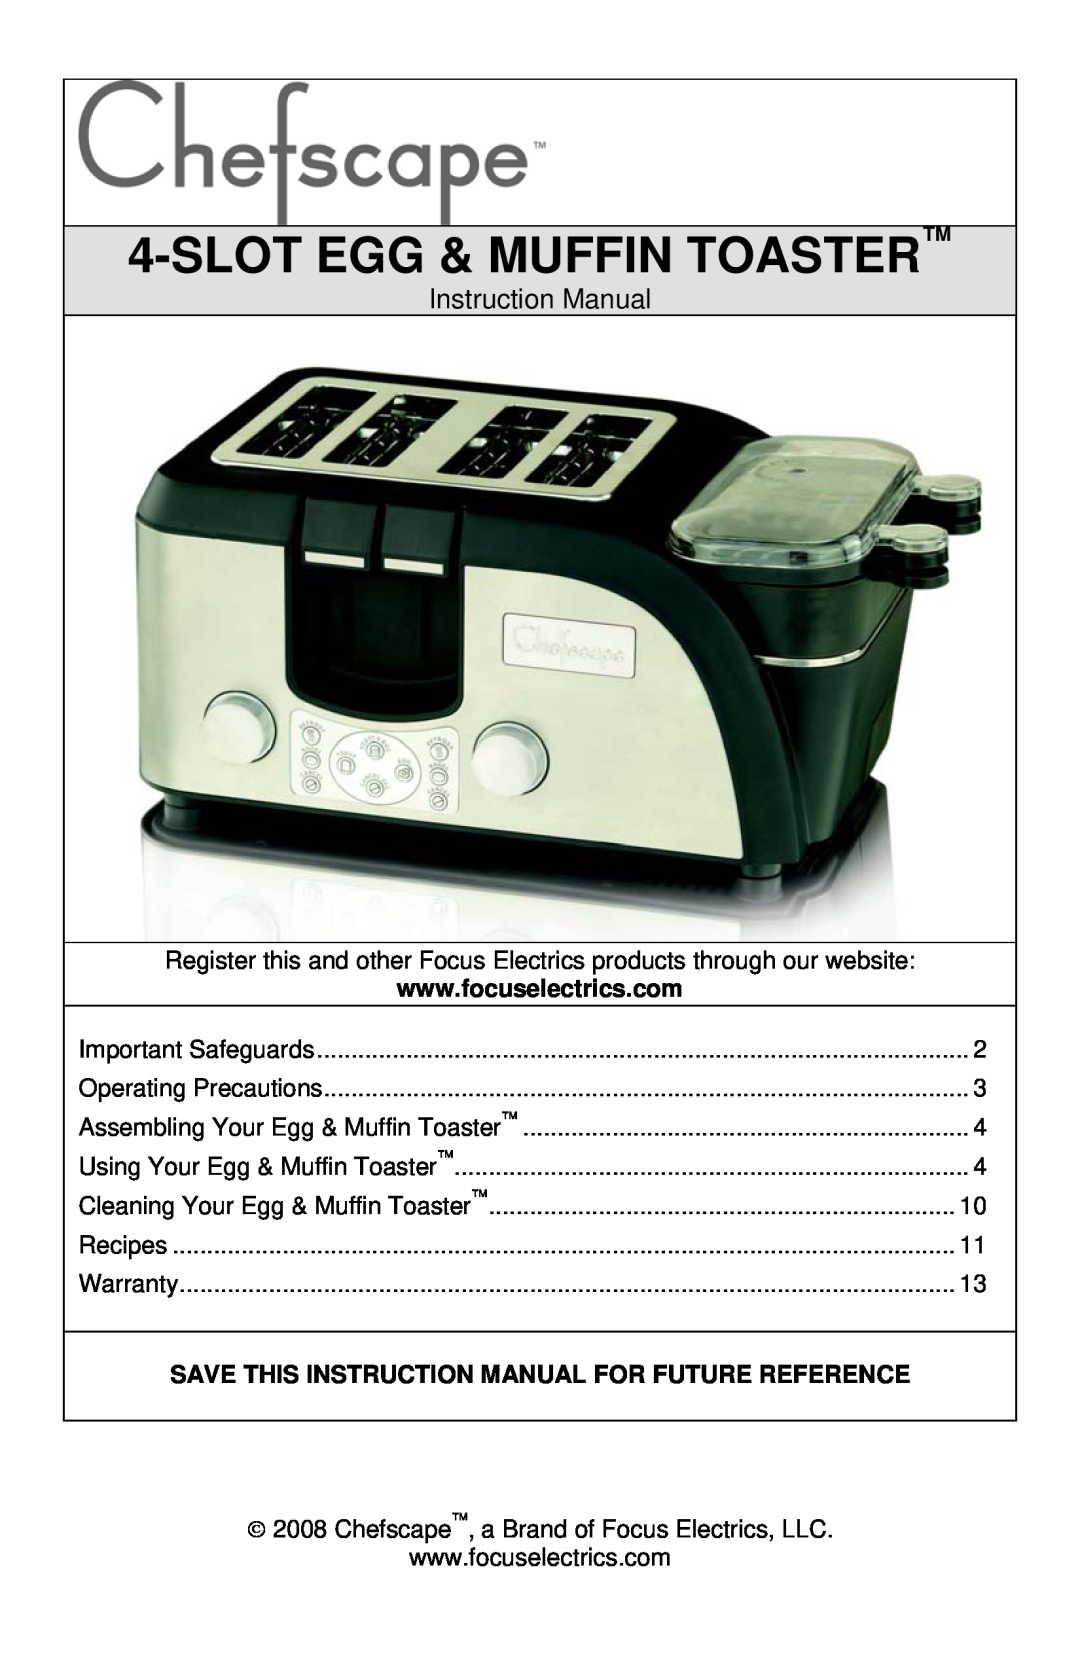 West Bend L5748, TEMPR instruction manual Slotegg & Muffin Toaster 